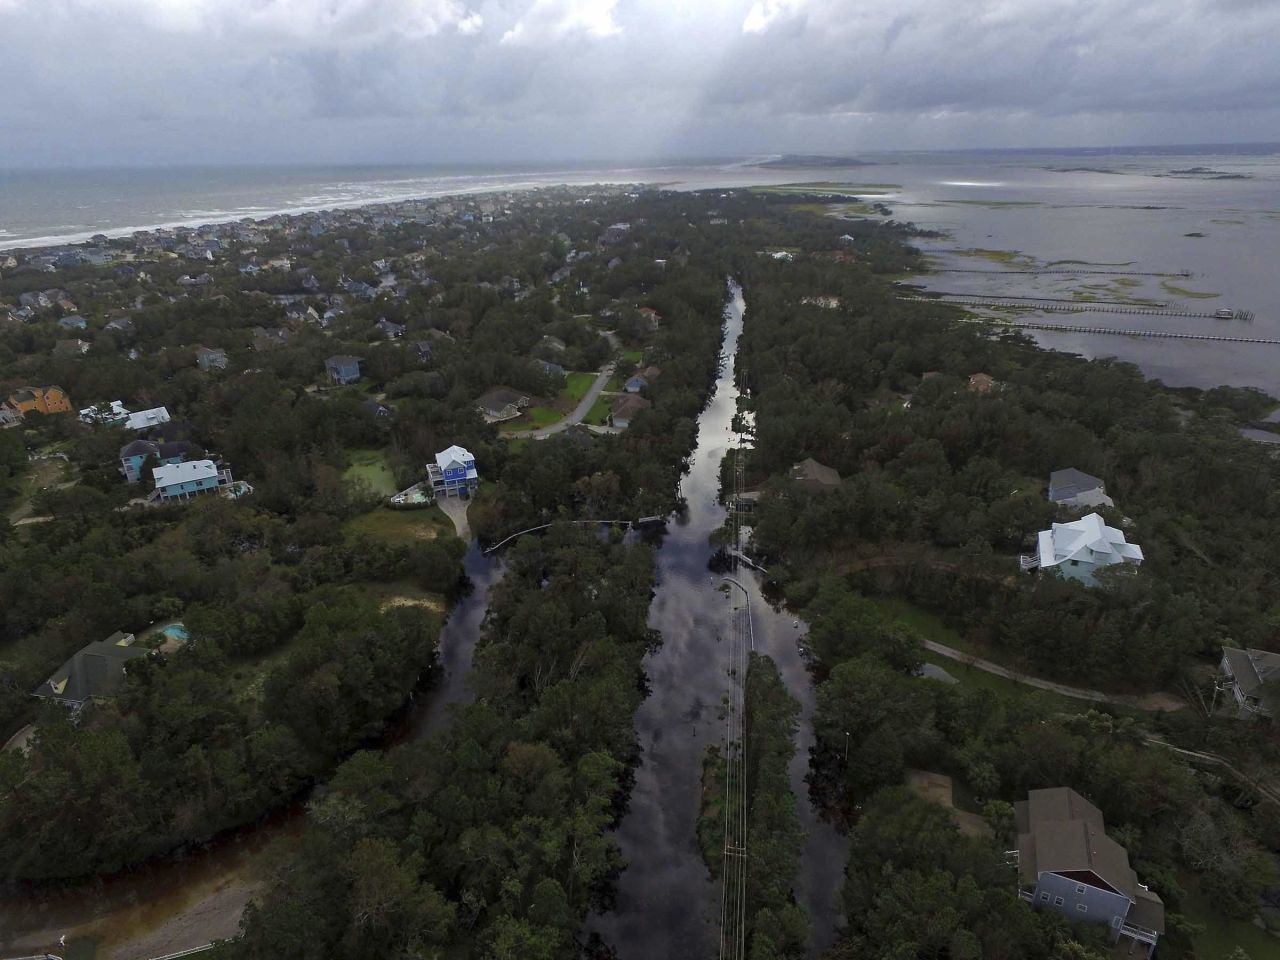 Floodwaters are seen on North Carolina's Emerald Isle on Sunday, September 16.